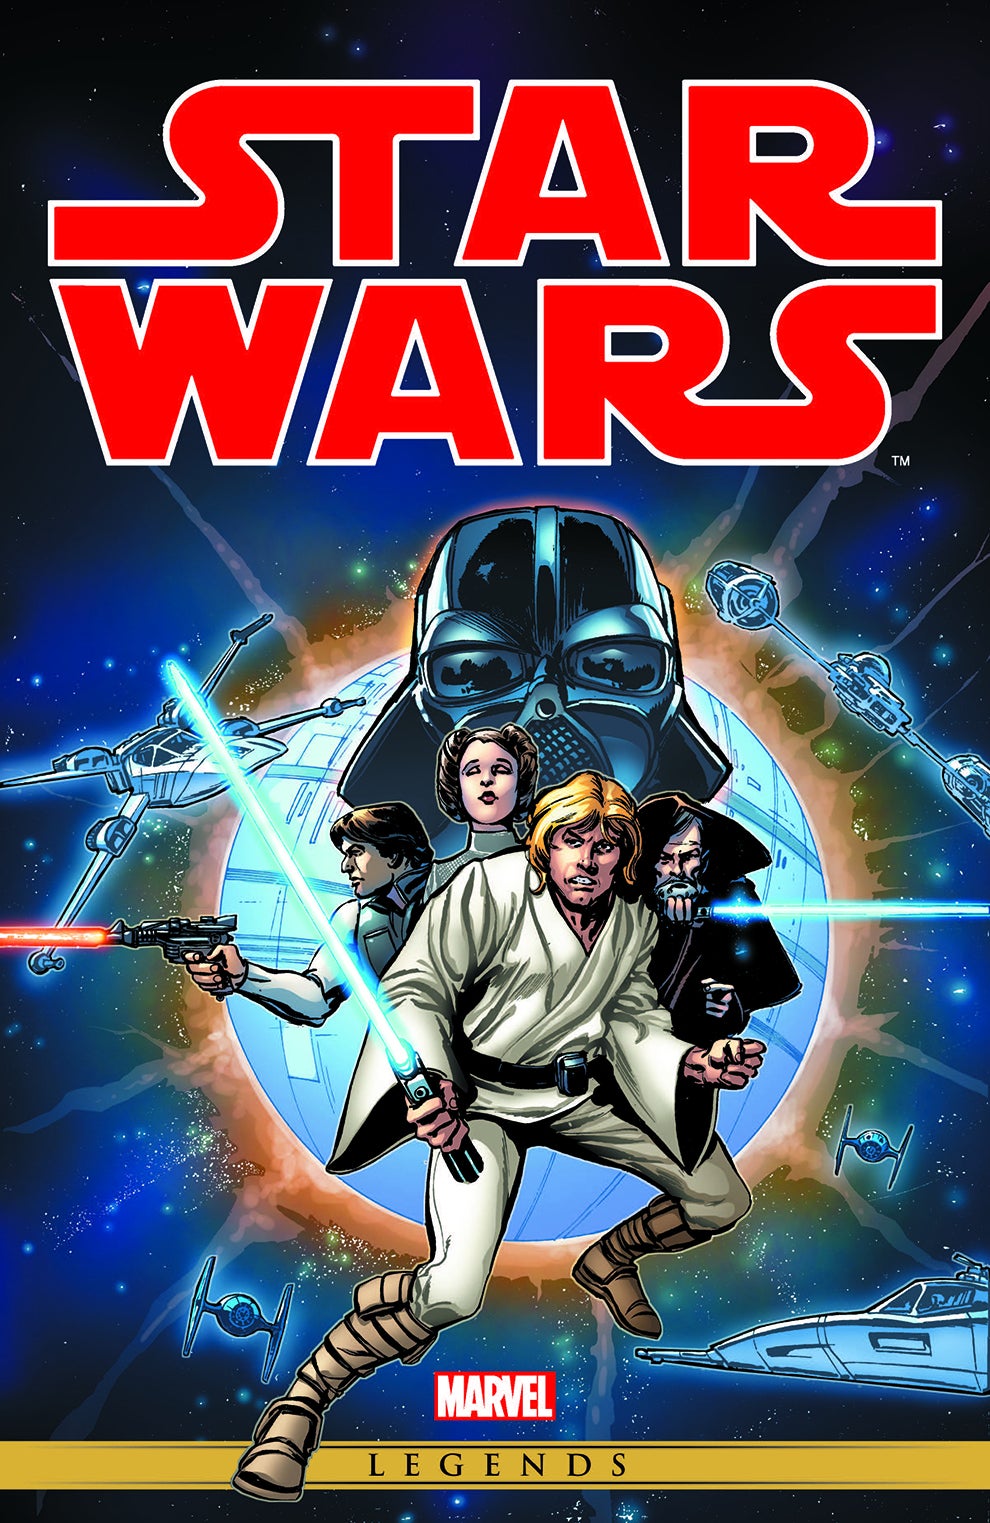 Star Wars the original Marvel Years hardcover artwork with Luke, Leia, Han Solo, The Emperor, and Vader